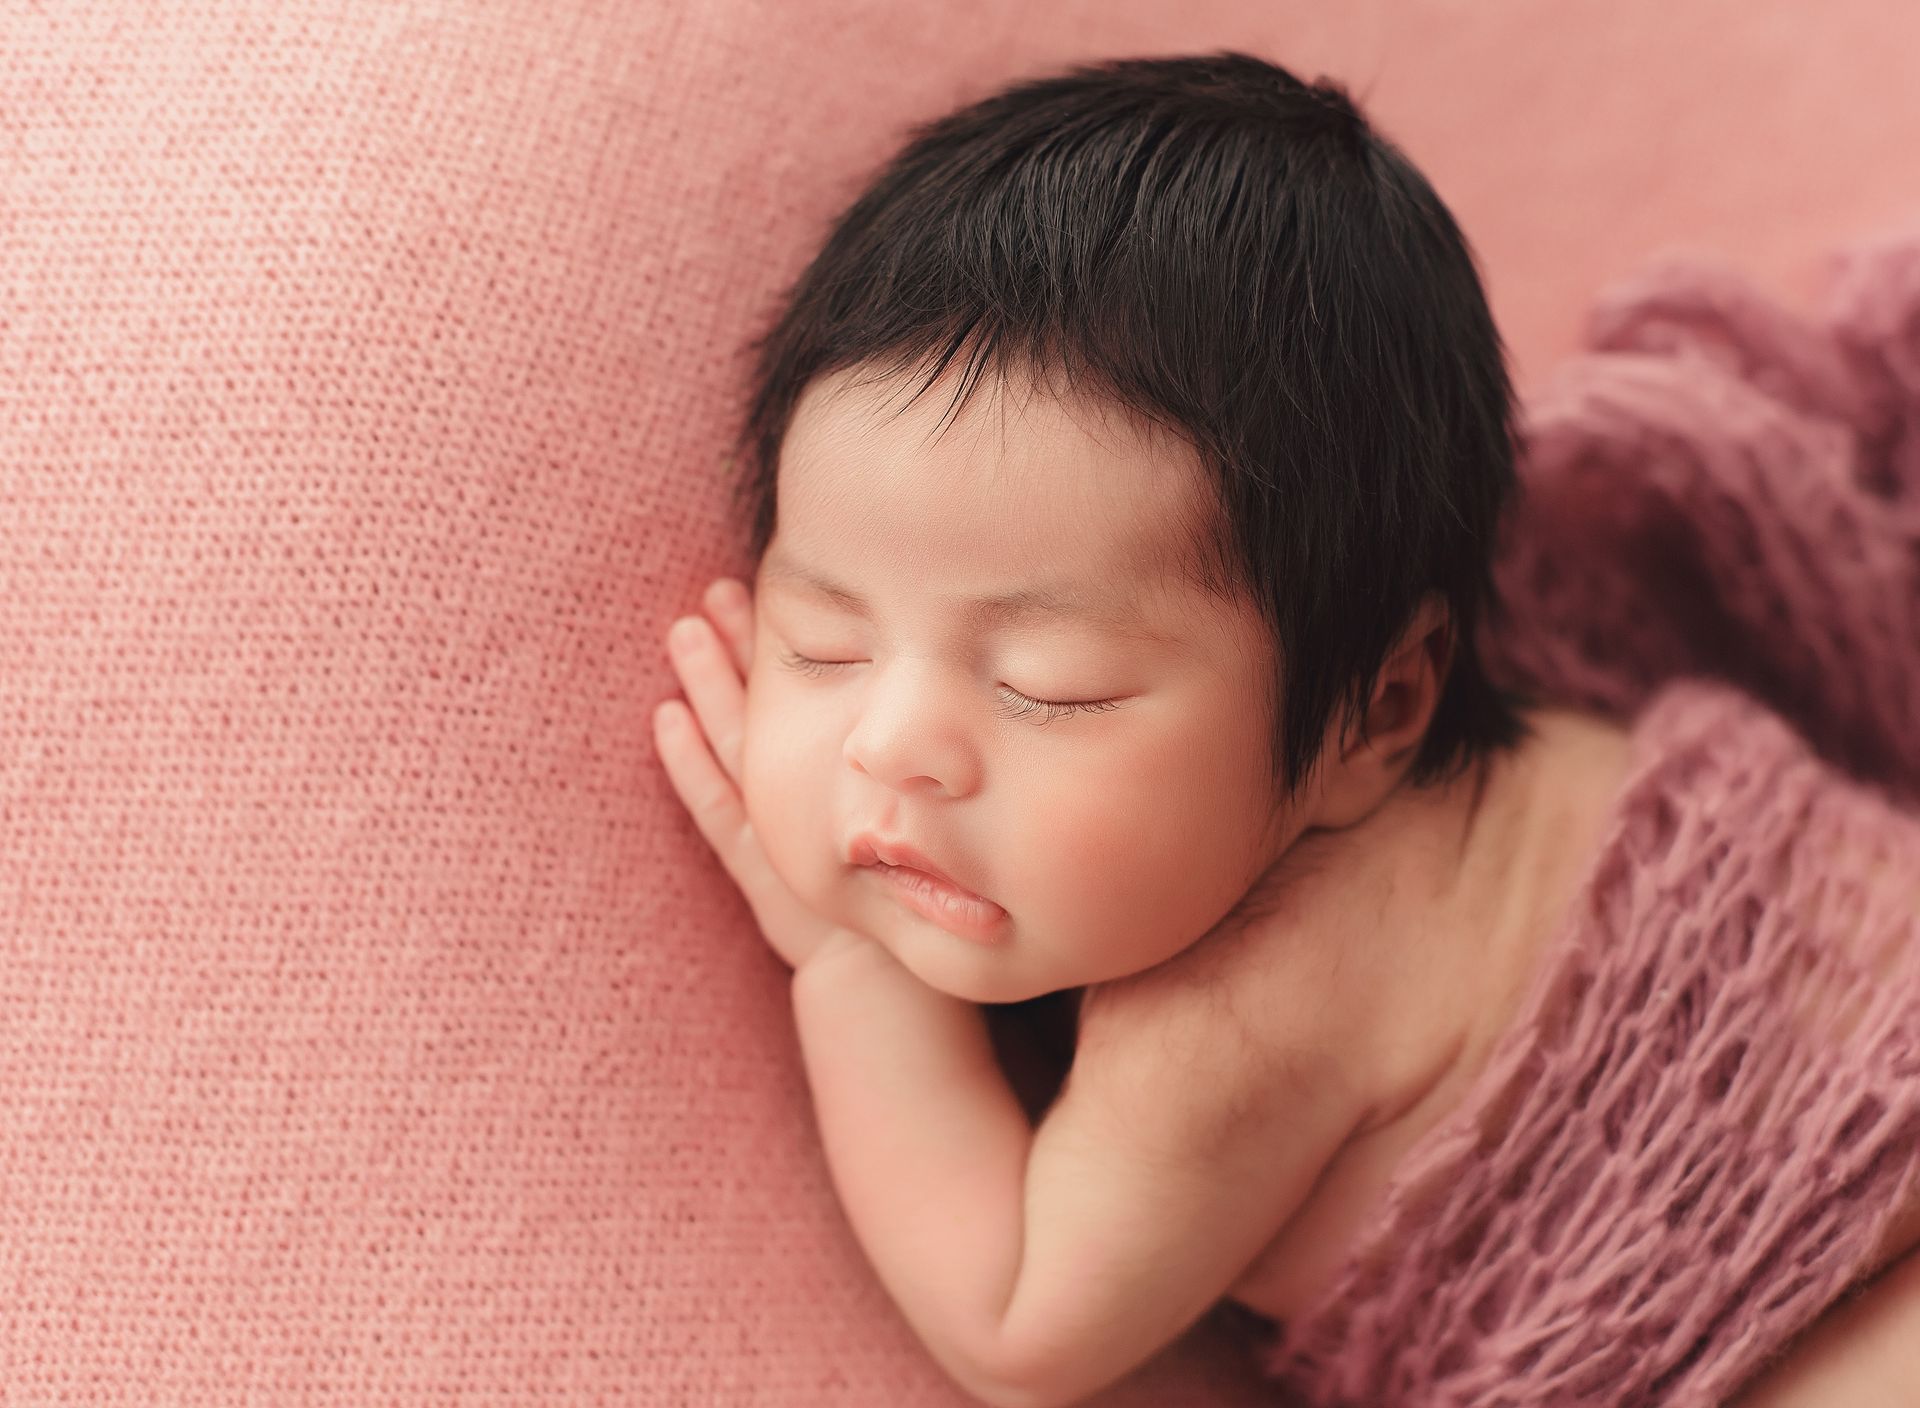 A newborn baby wrapped in a pink blanket is sleeping on a pink blanket.